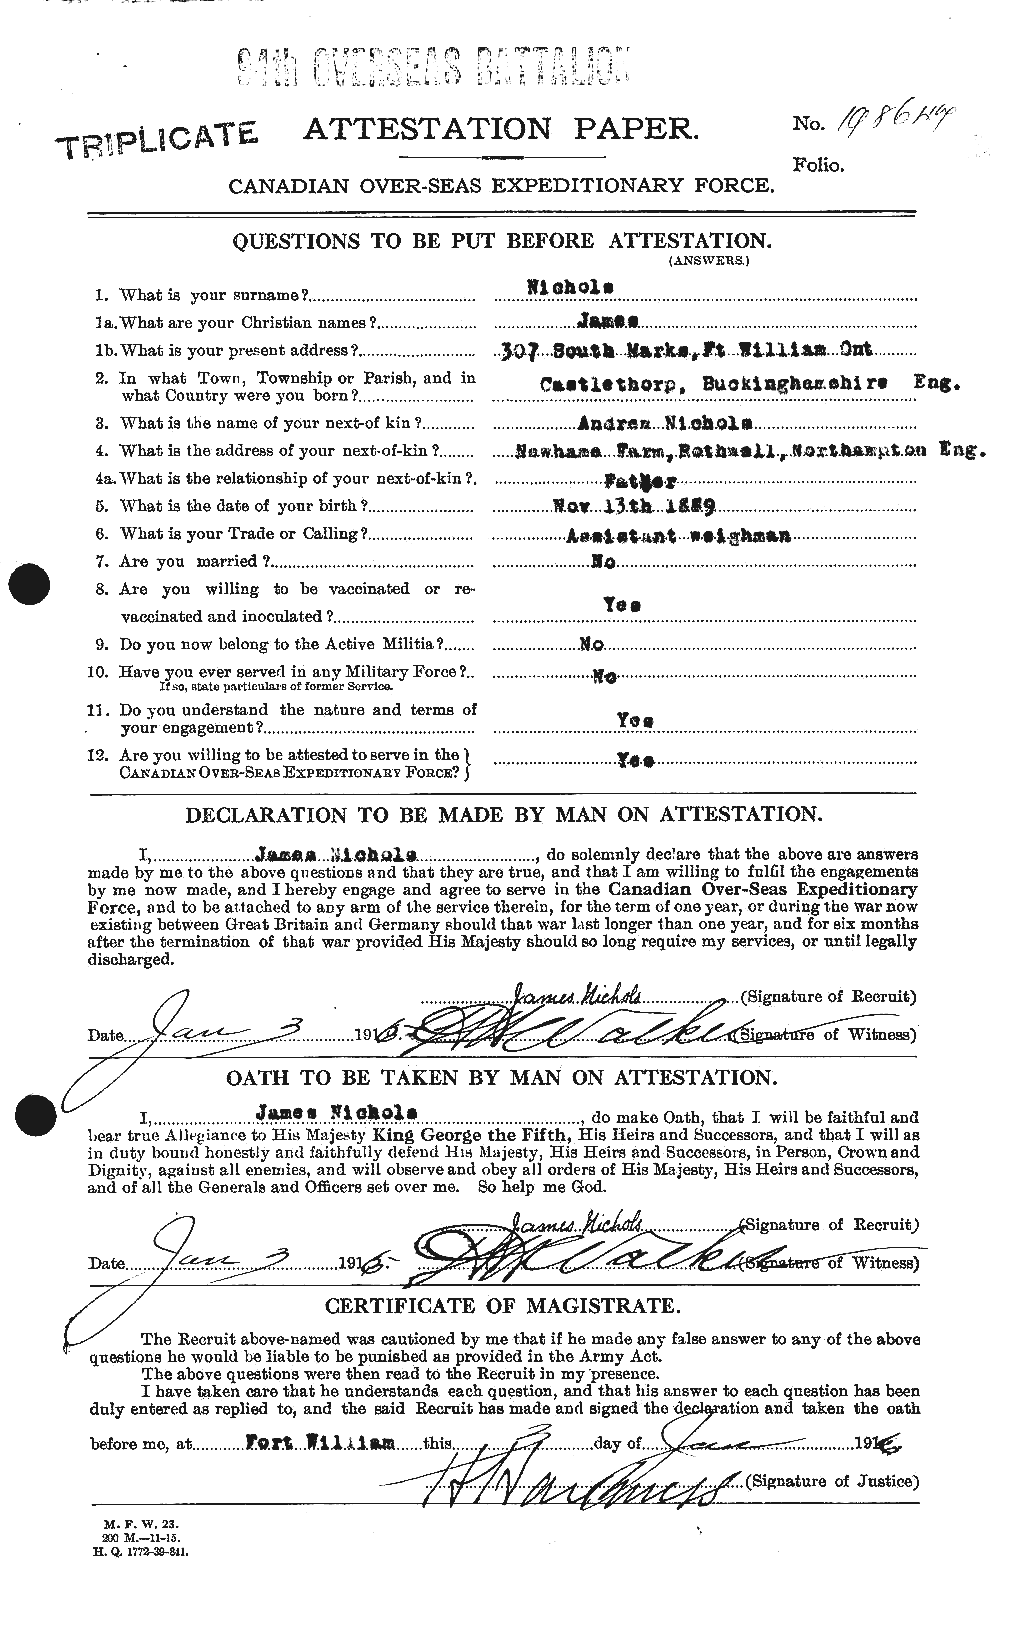 Personnel Records of the First World War - CEF 550999a